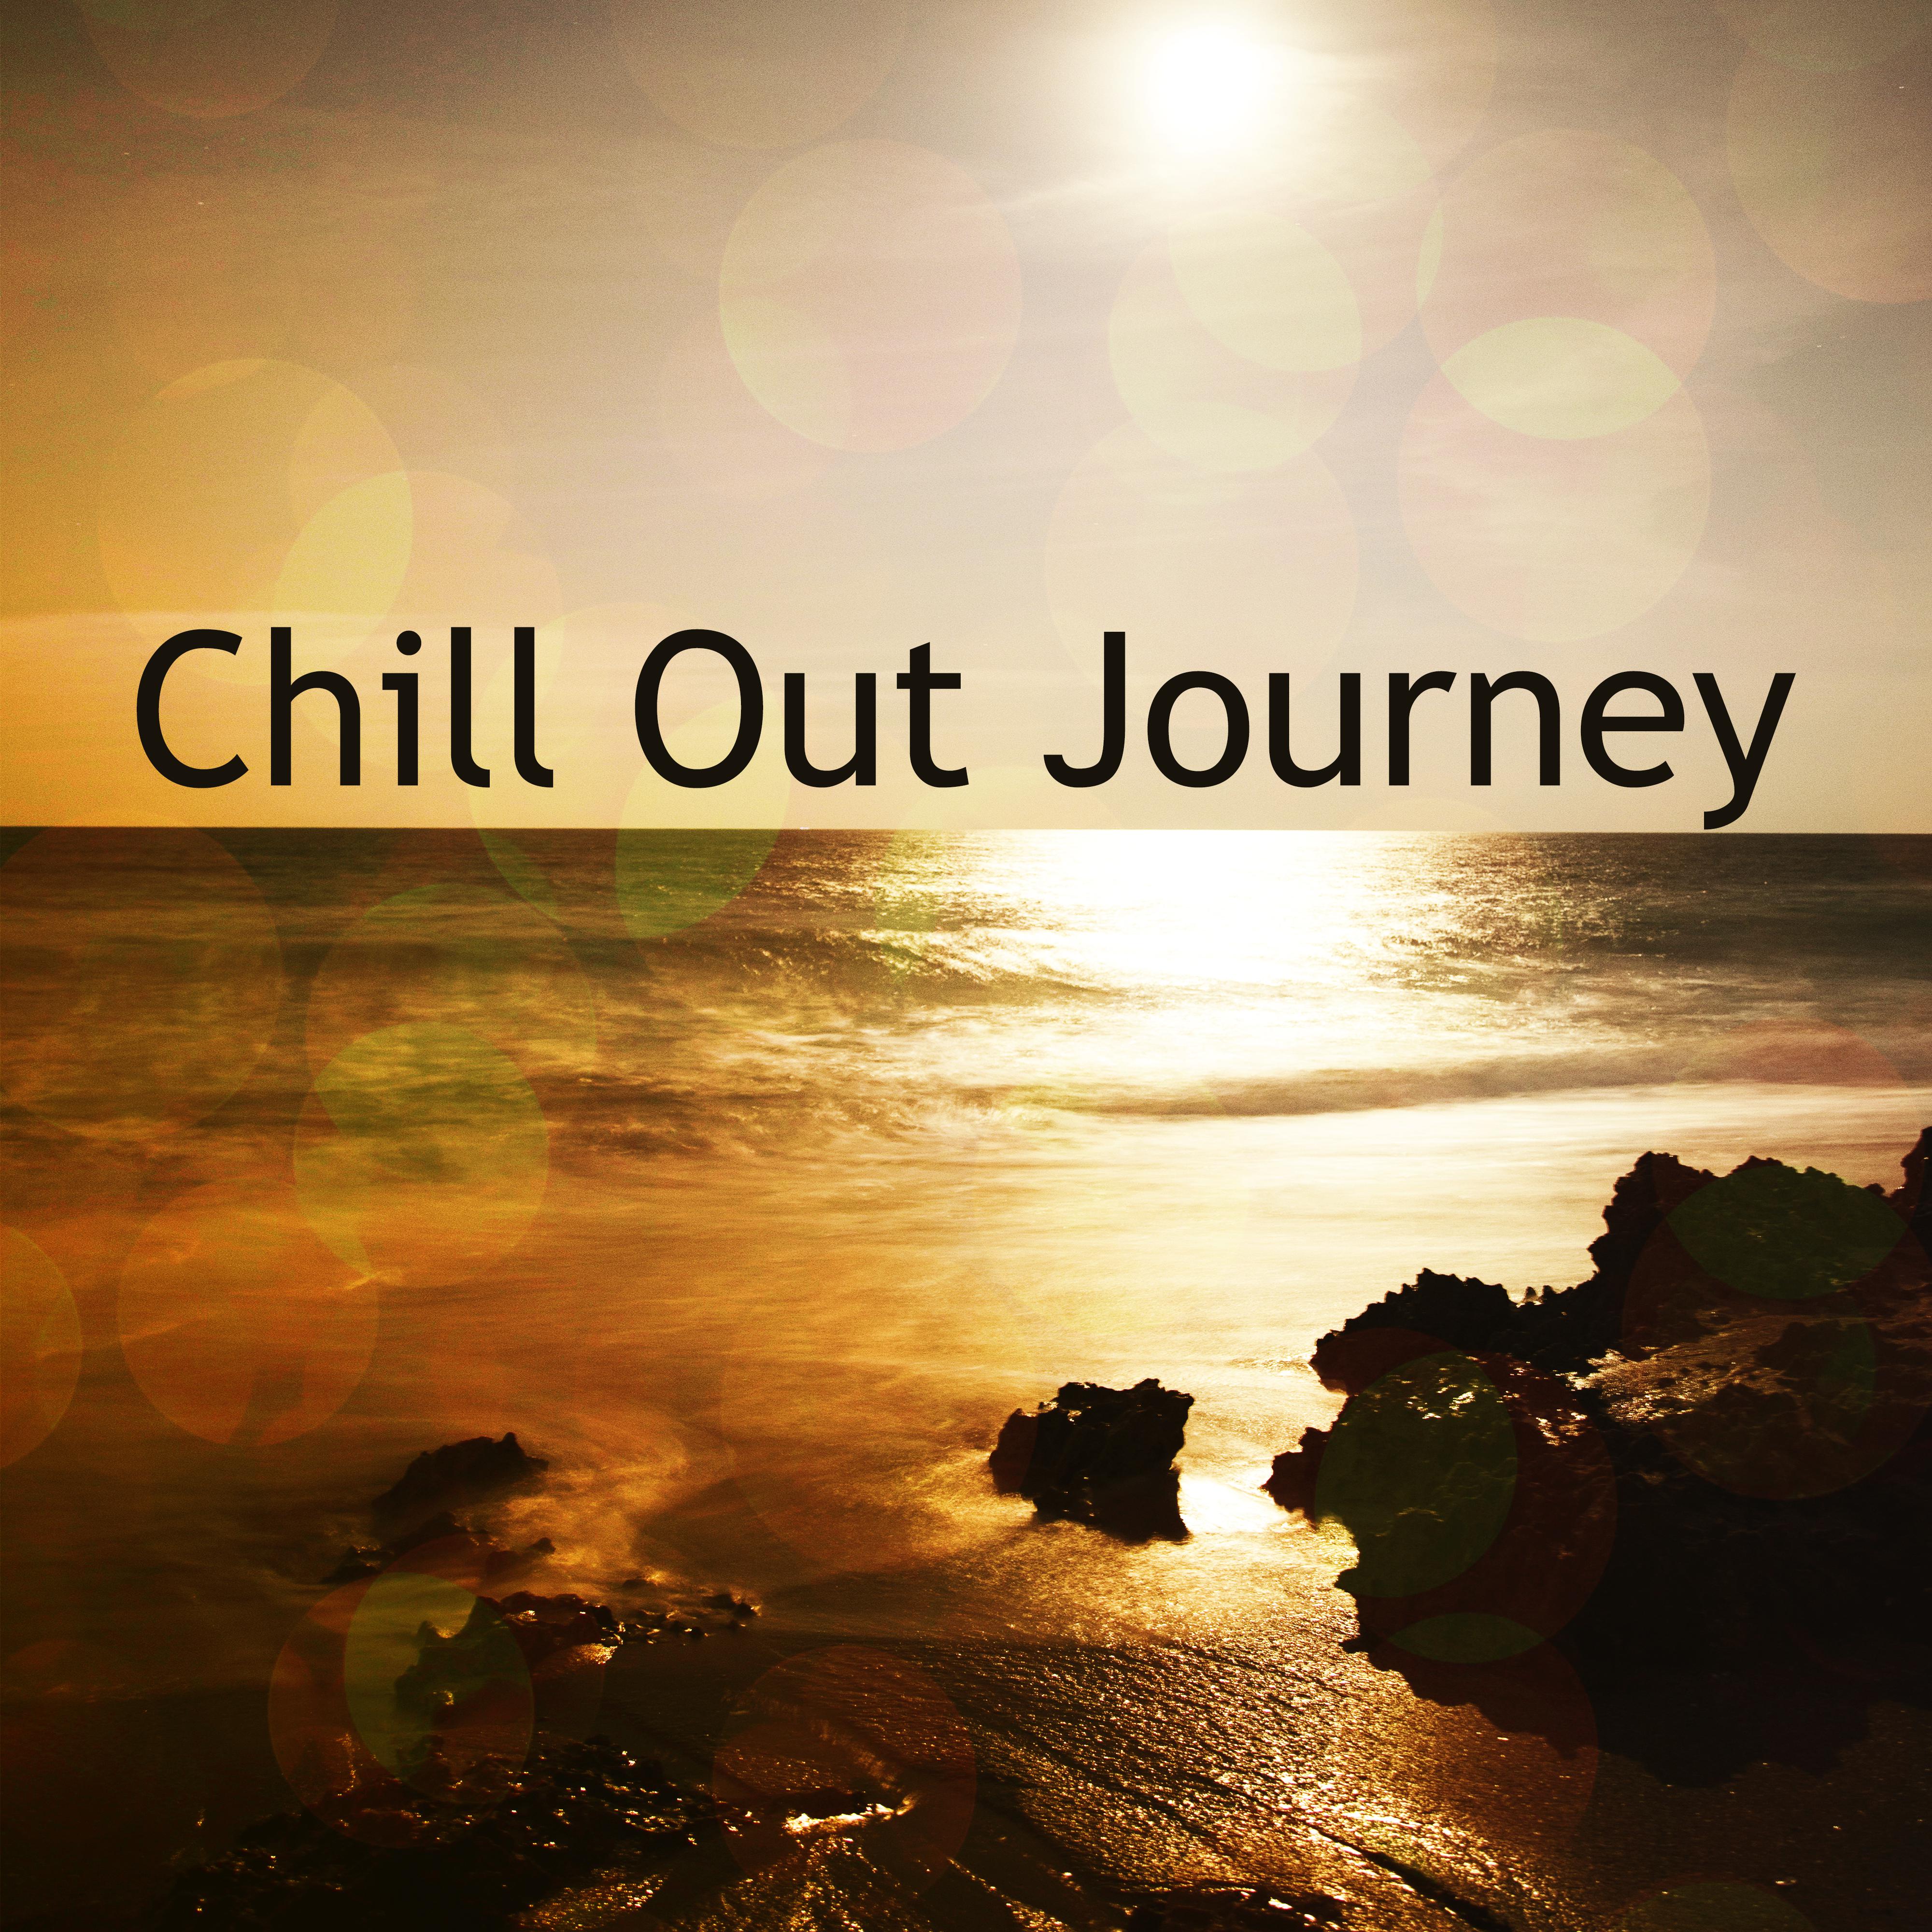 Chill Out Journey – Summer Music, Chill Out Songs, Chill Out Ibiza, Hotel Lounge, Deep Beats